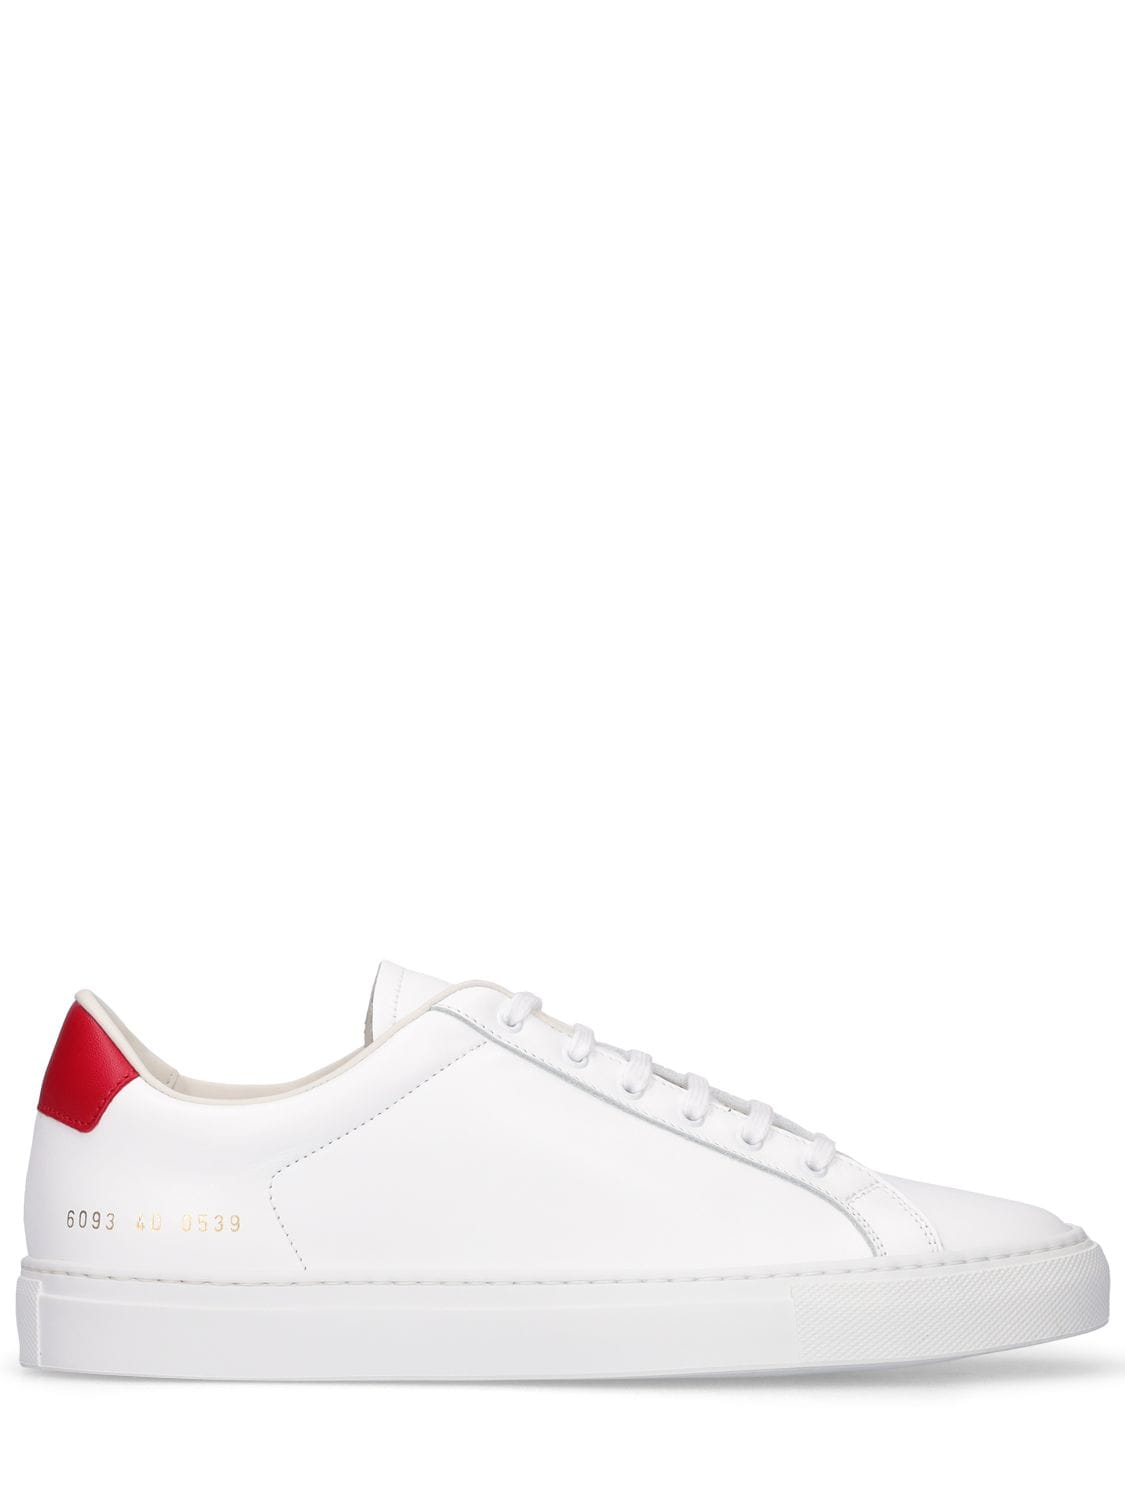 Mm Retro Low Leather Sneakers - COMMON PROJECTS - Modalova